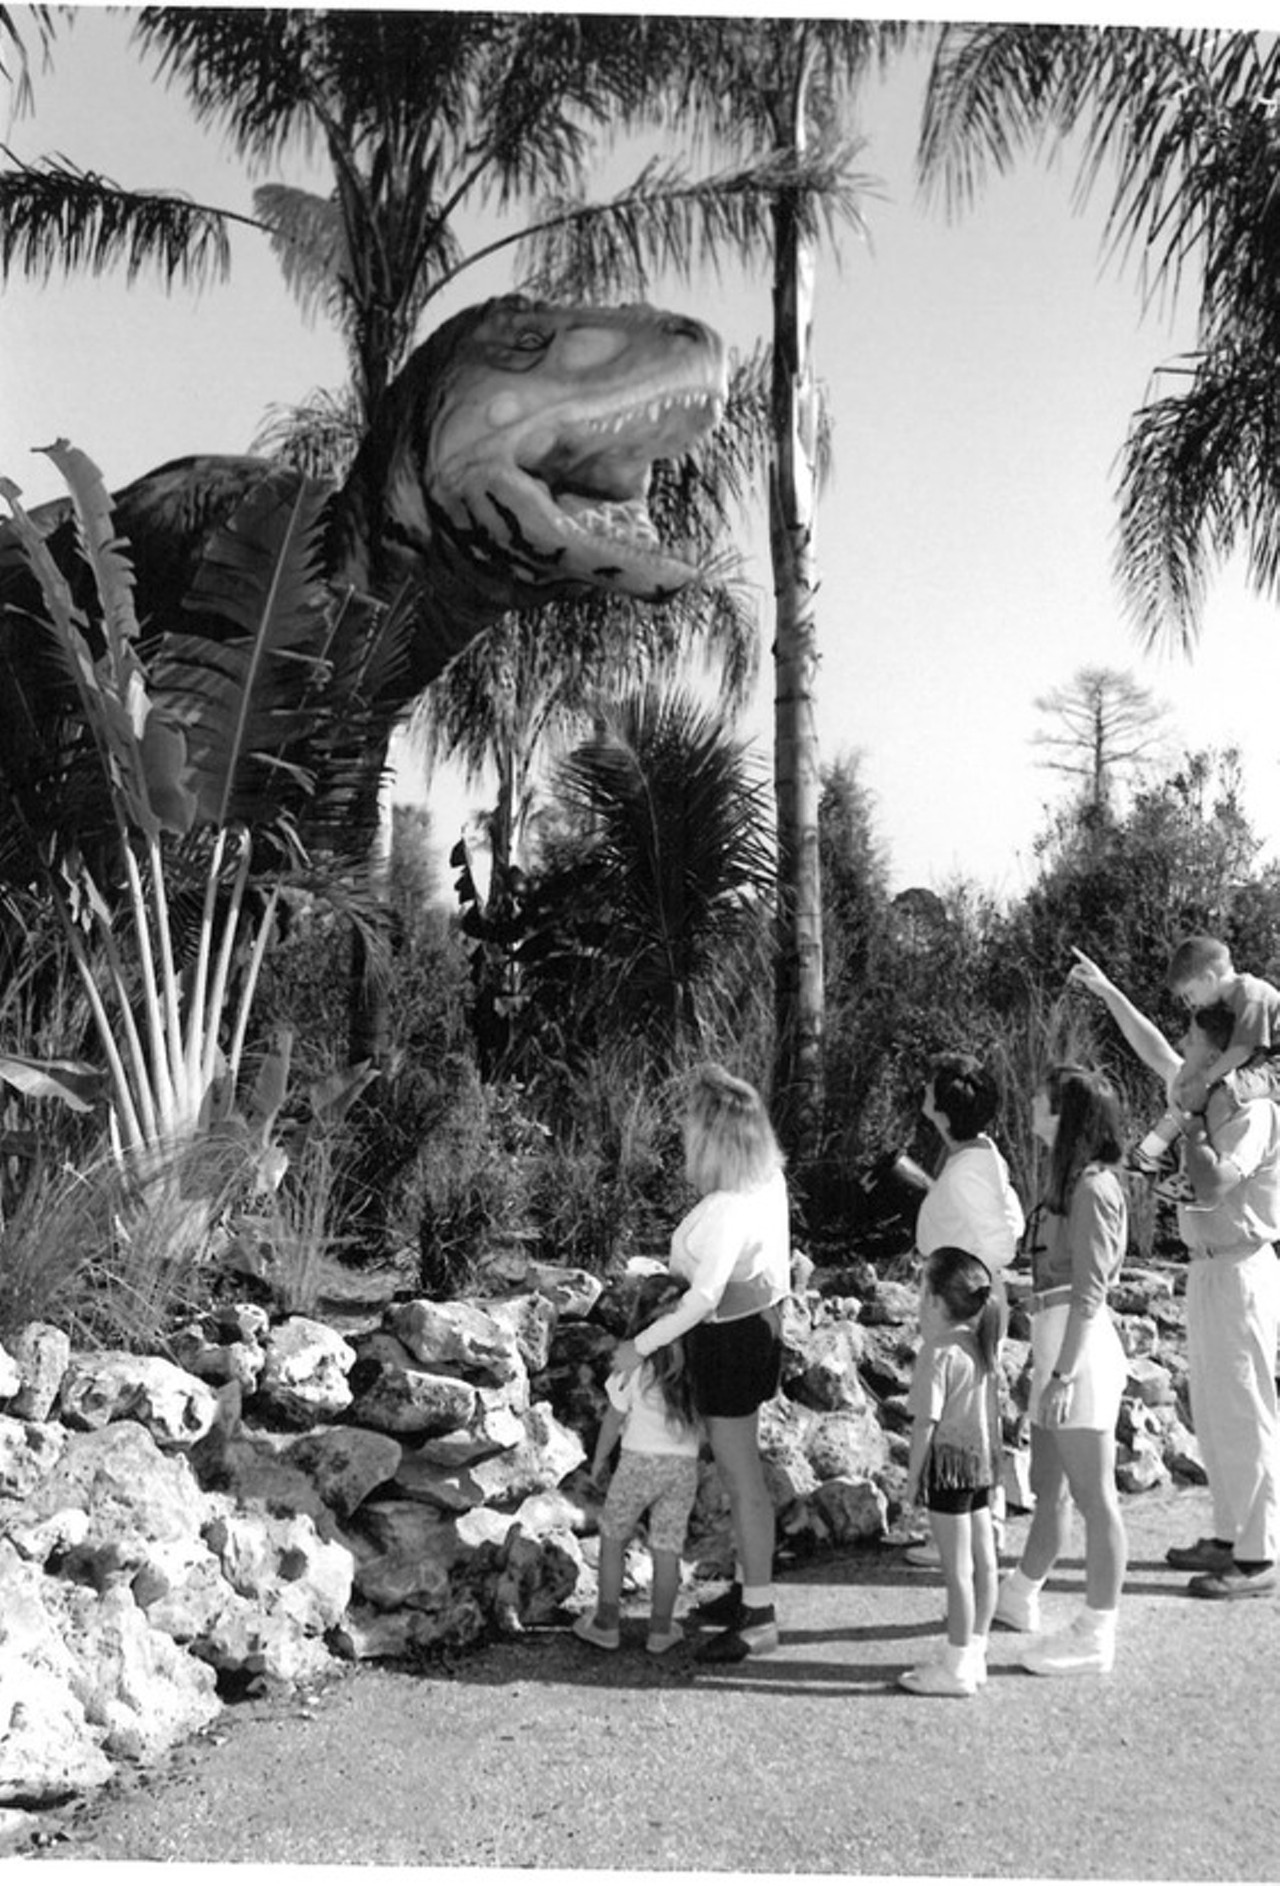 From the archives: Vintage photos of SeaWorld Orlando in the early '90s